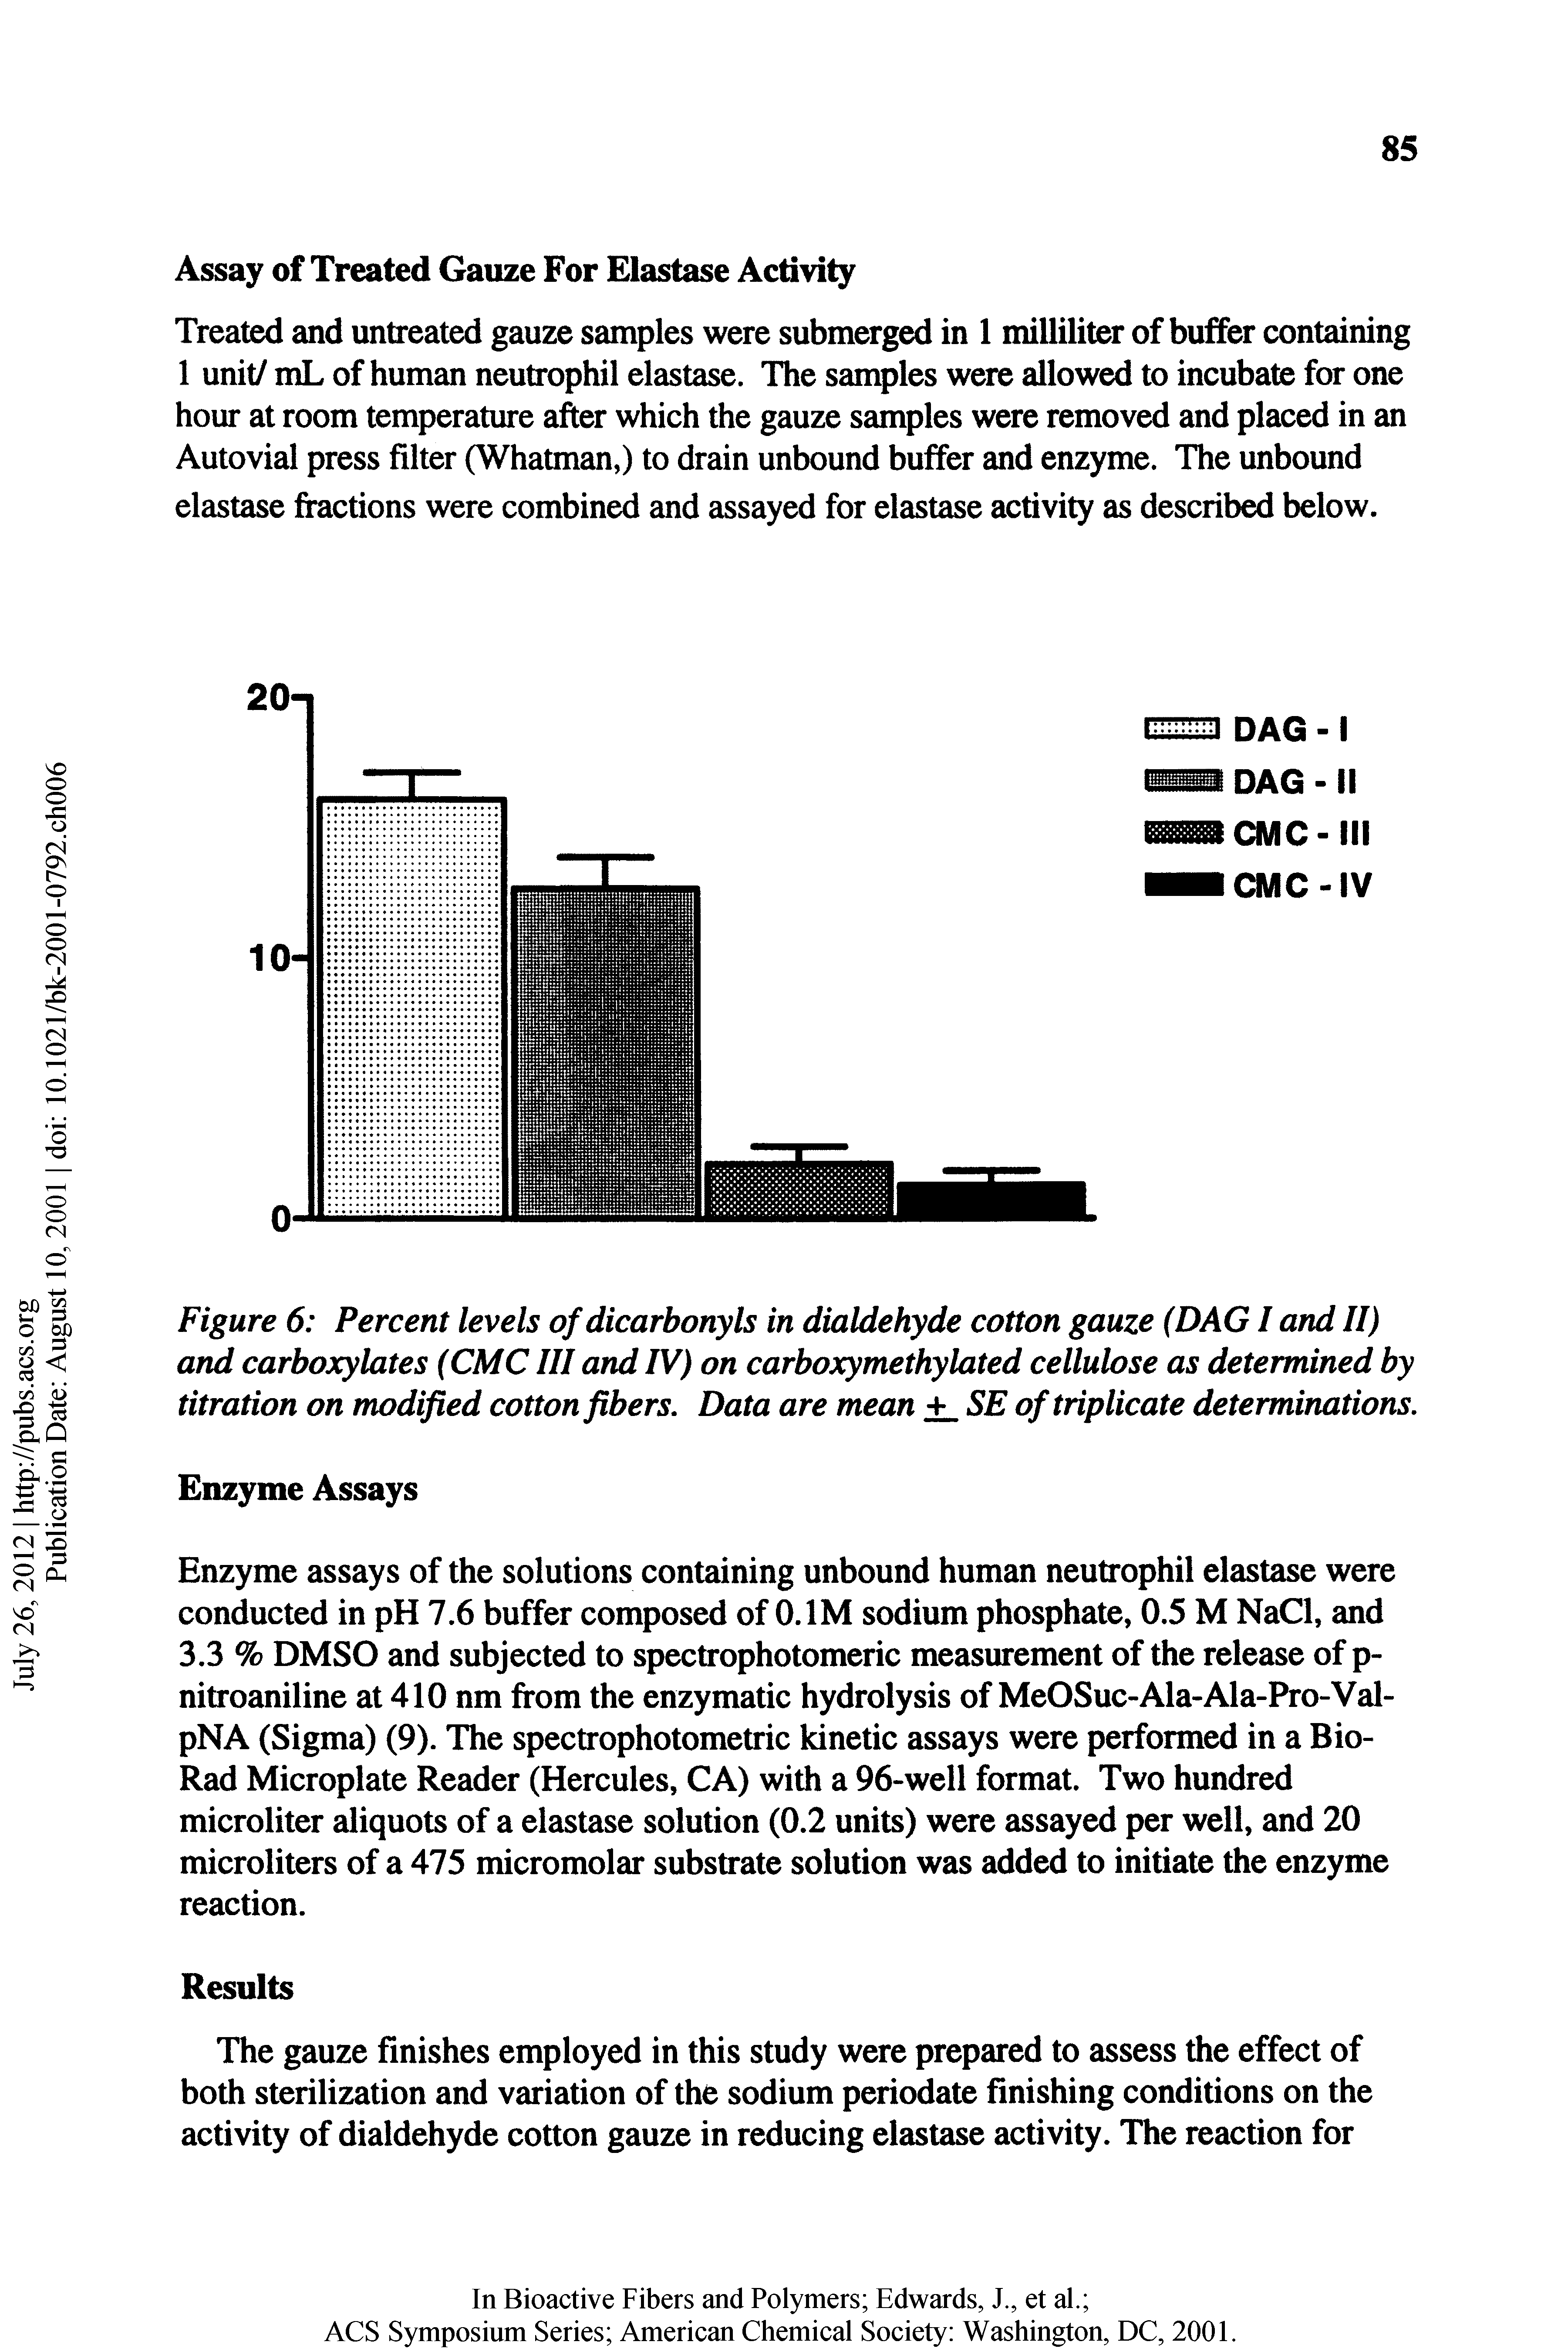 Figure 6 Percent levels of dicarbonyls in dialdehyde cotton gauze (DAG I and II) and carboxylates (CMC III and TV) on carboxymethylated cellulose as determined by titration on modified cotton fibers. Data are mean SE of triplicate determinations.